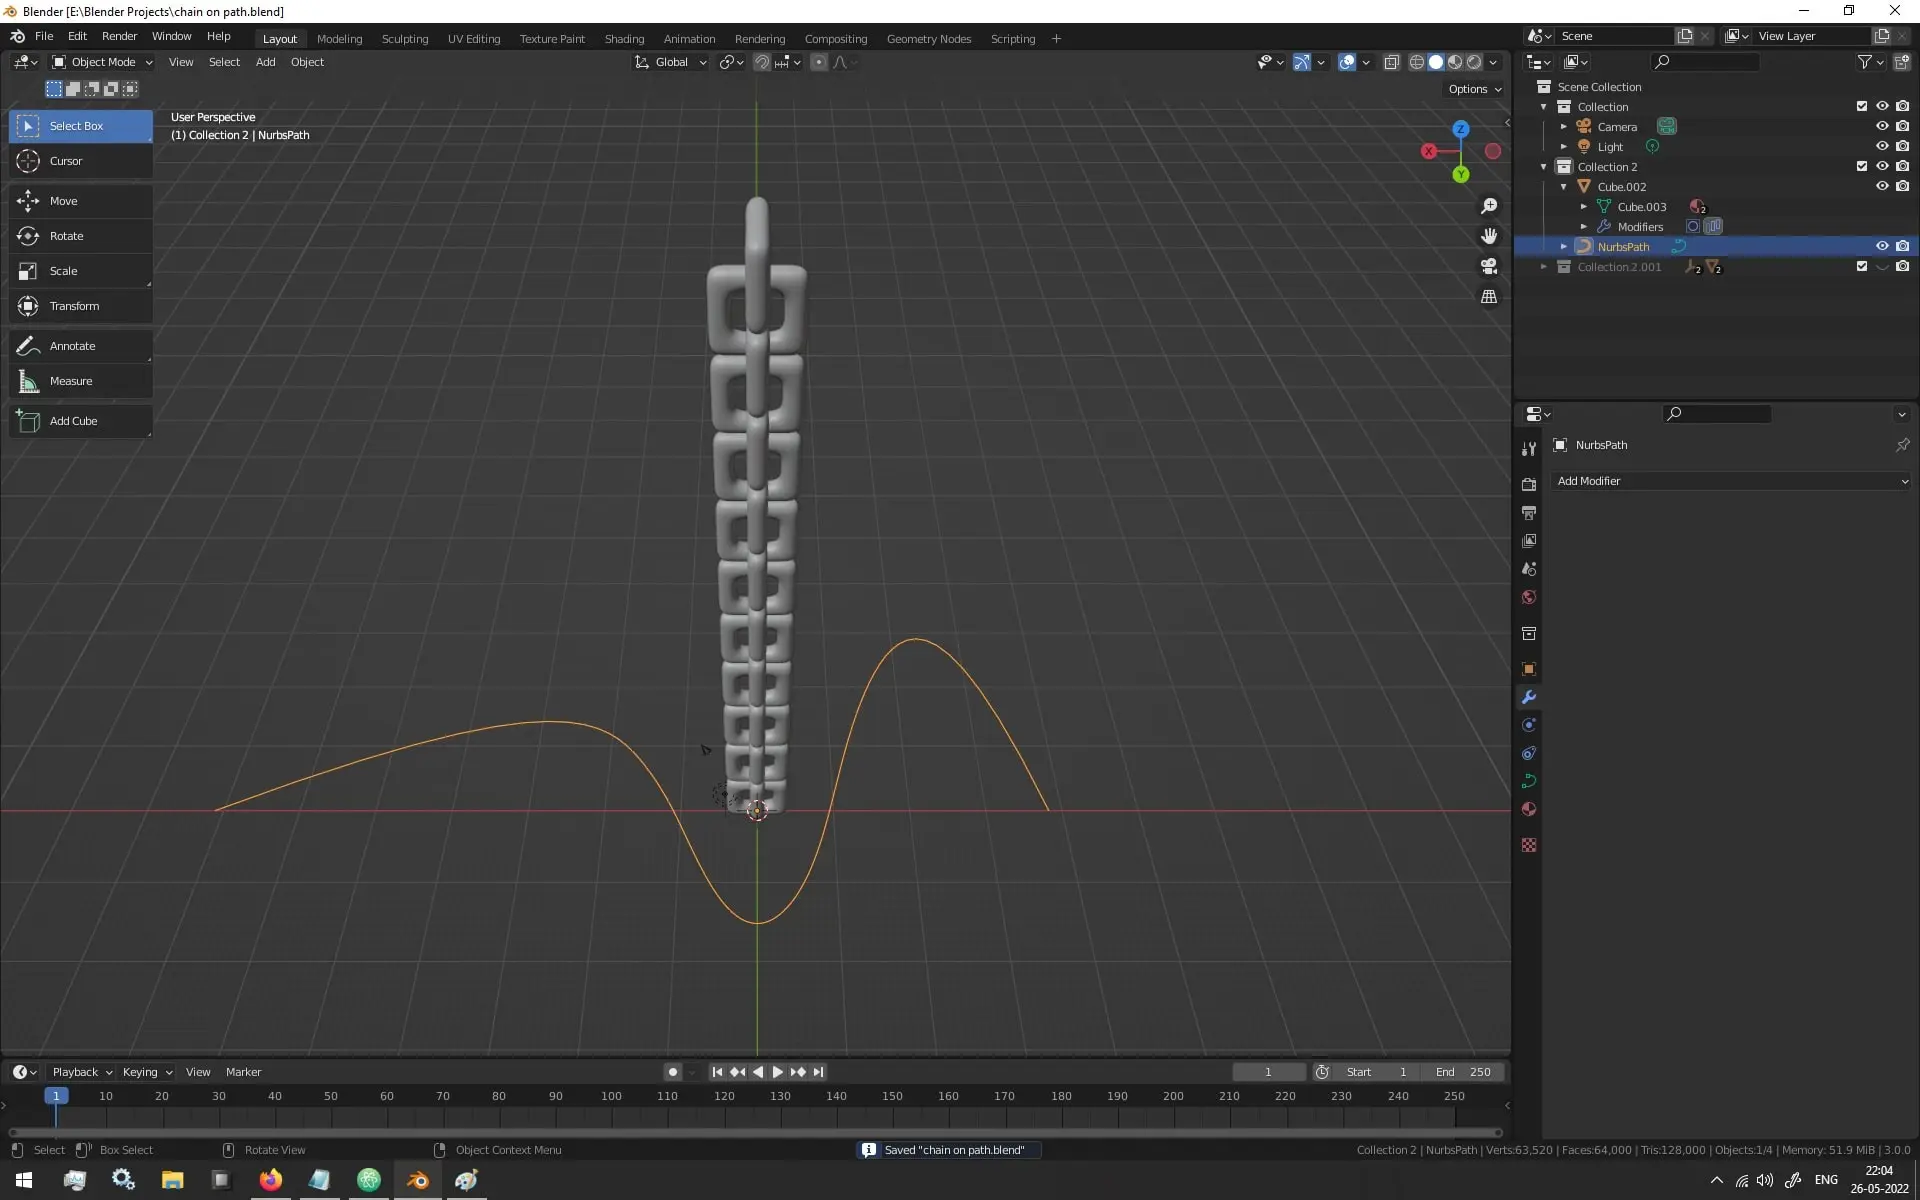 How to make a 3D Model or an Array of 3D Model Follow A Curve - Step 3 - My Final Path Curve Design